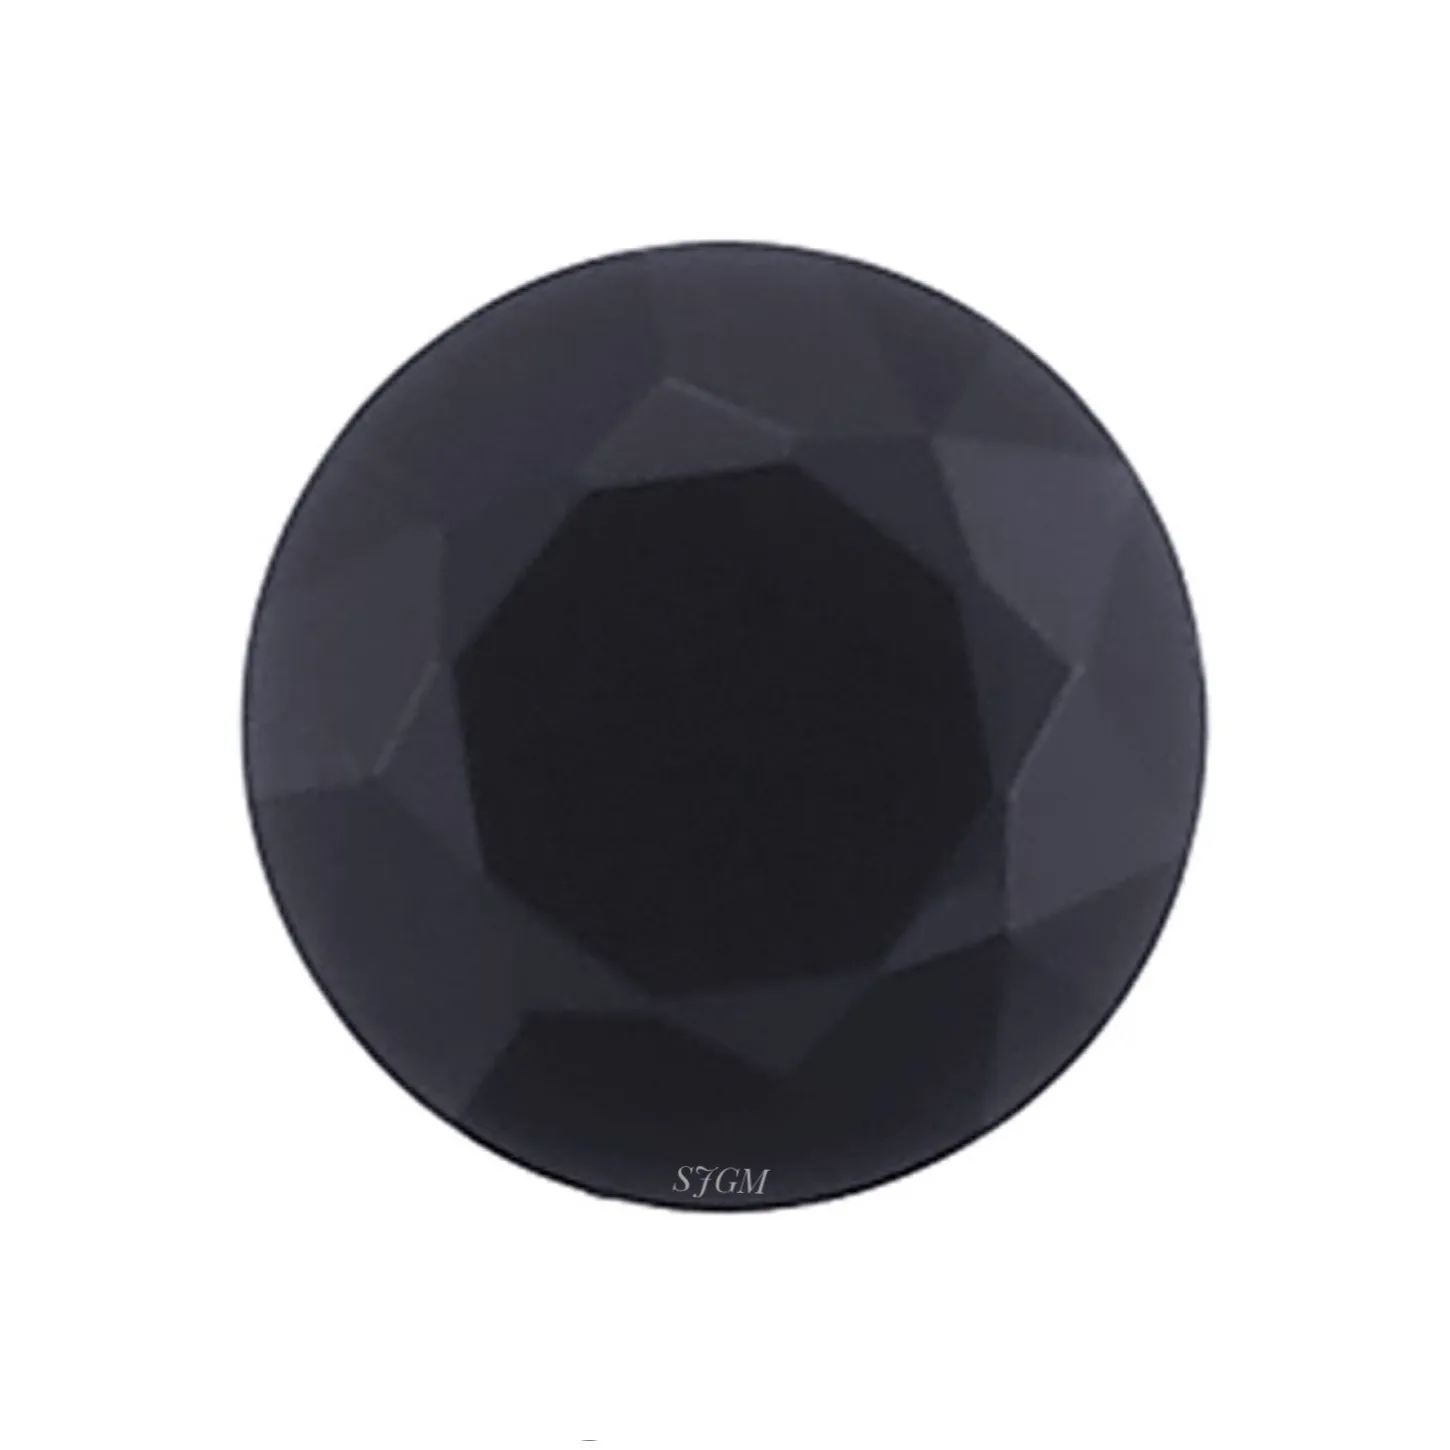 7MM Black Spinel Cushion Shape Faceted Loose Gemstone Natural Black Spinel Cushion Gems